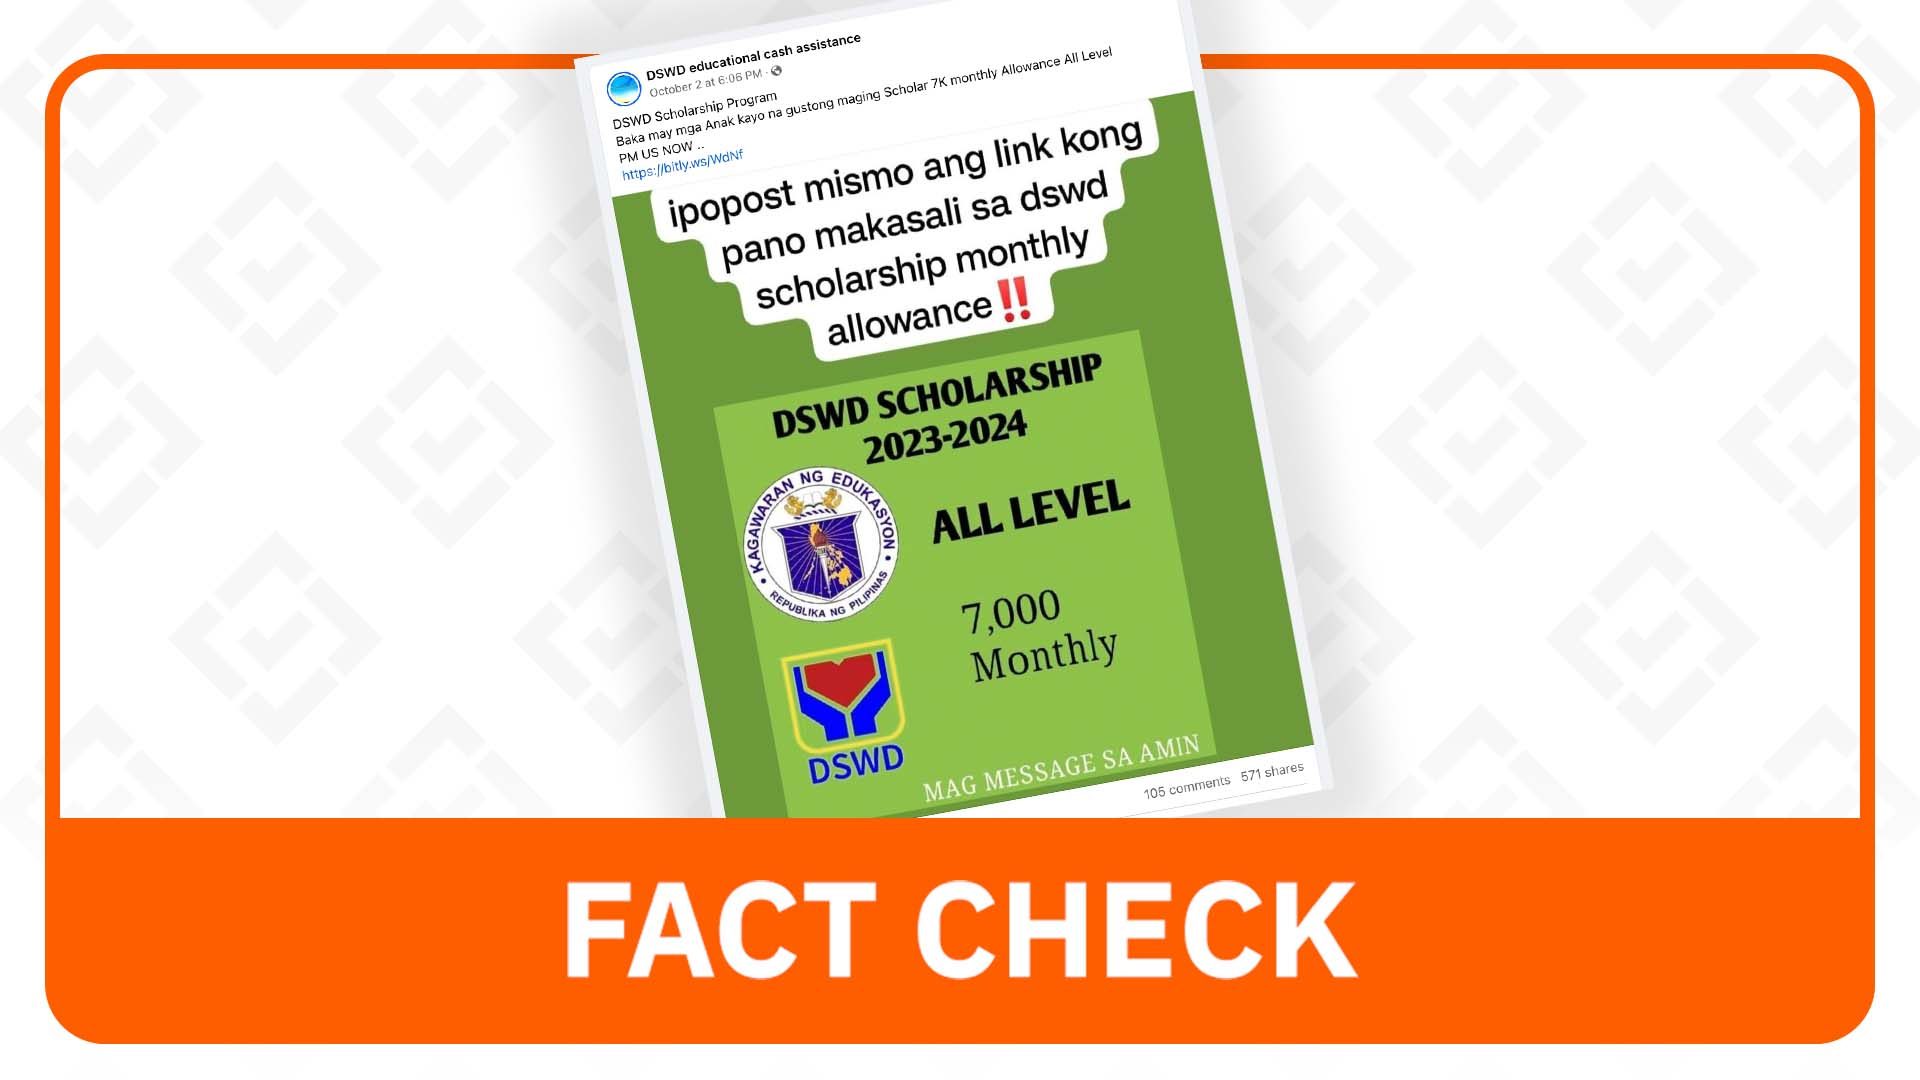 FACT CHECK: DSWD does not have monthly allowance program for students